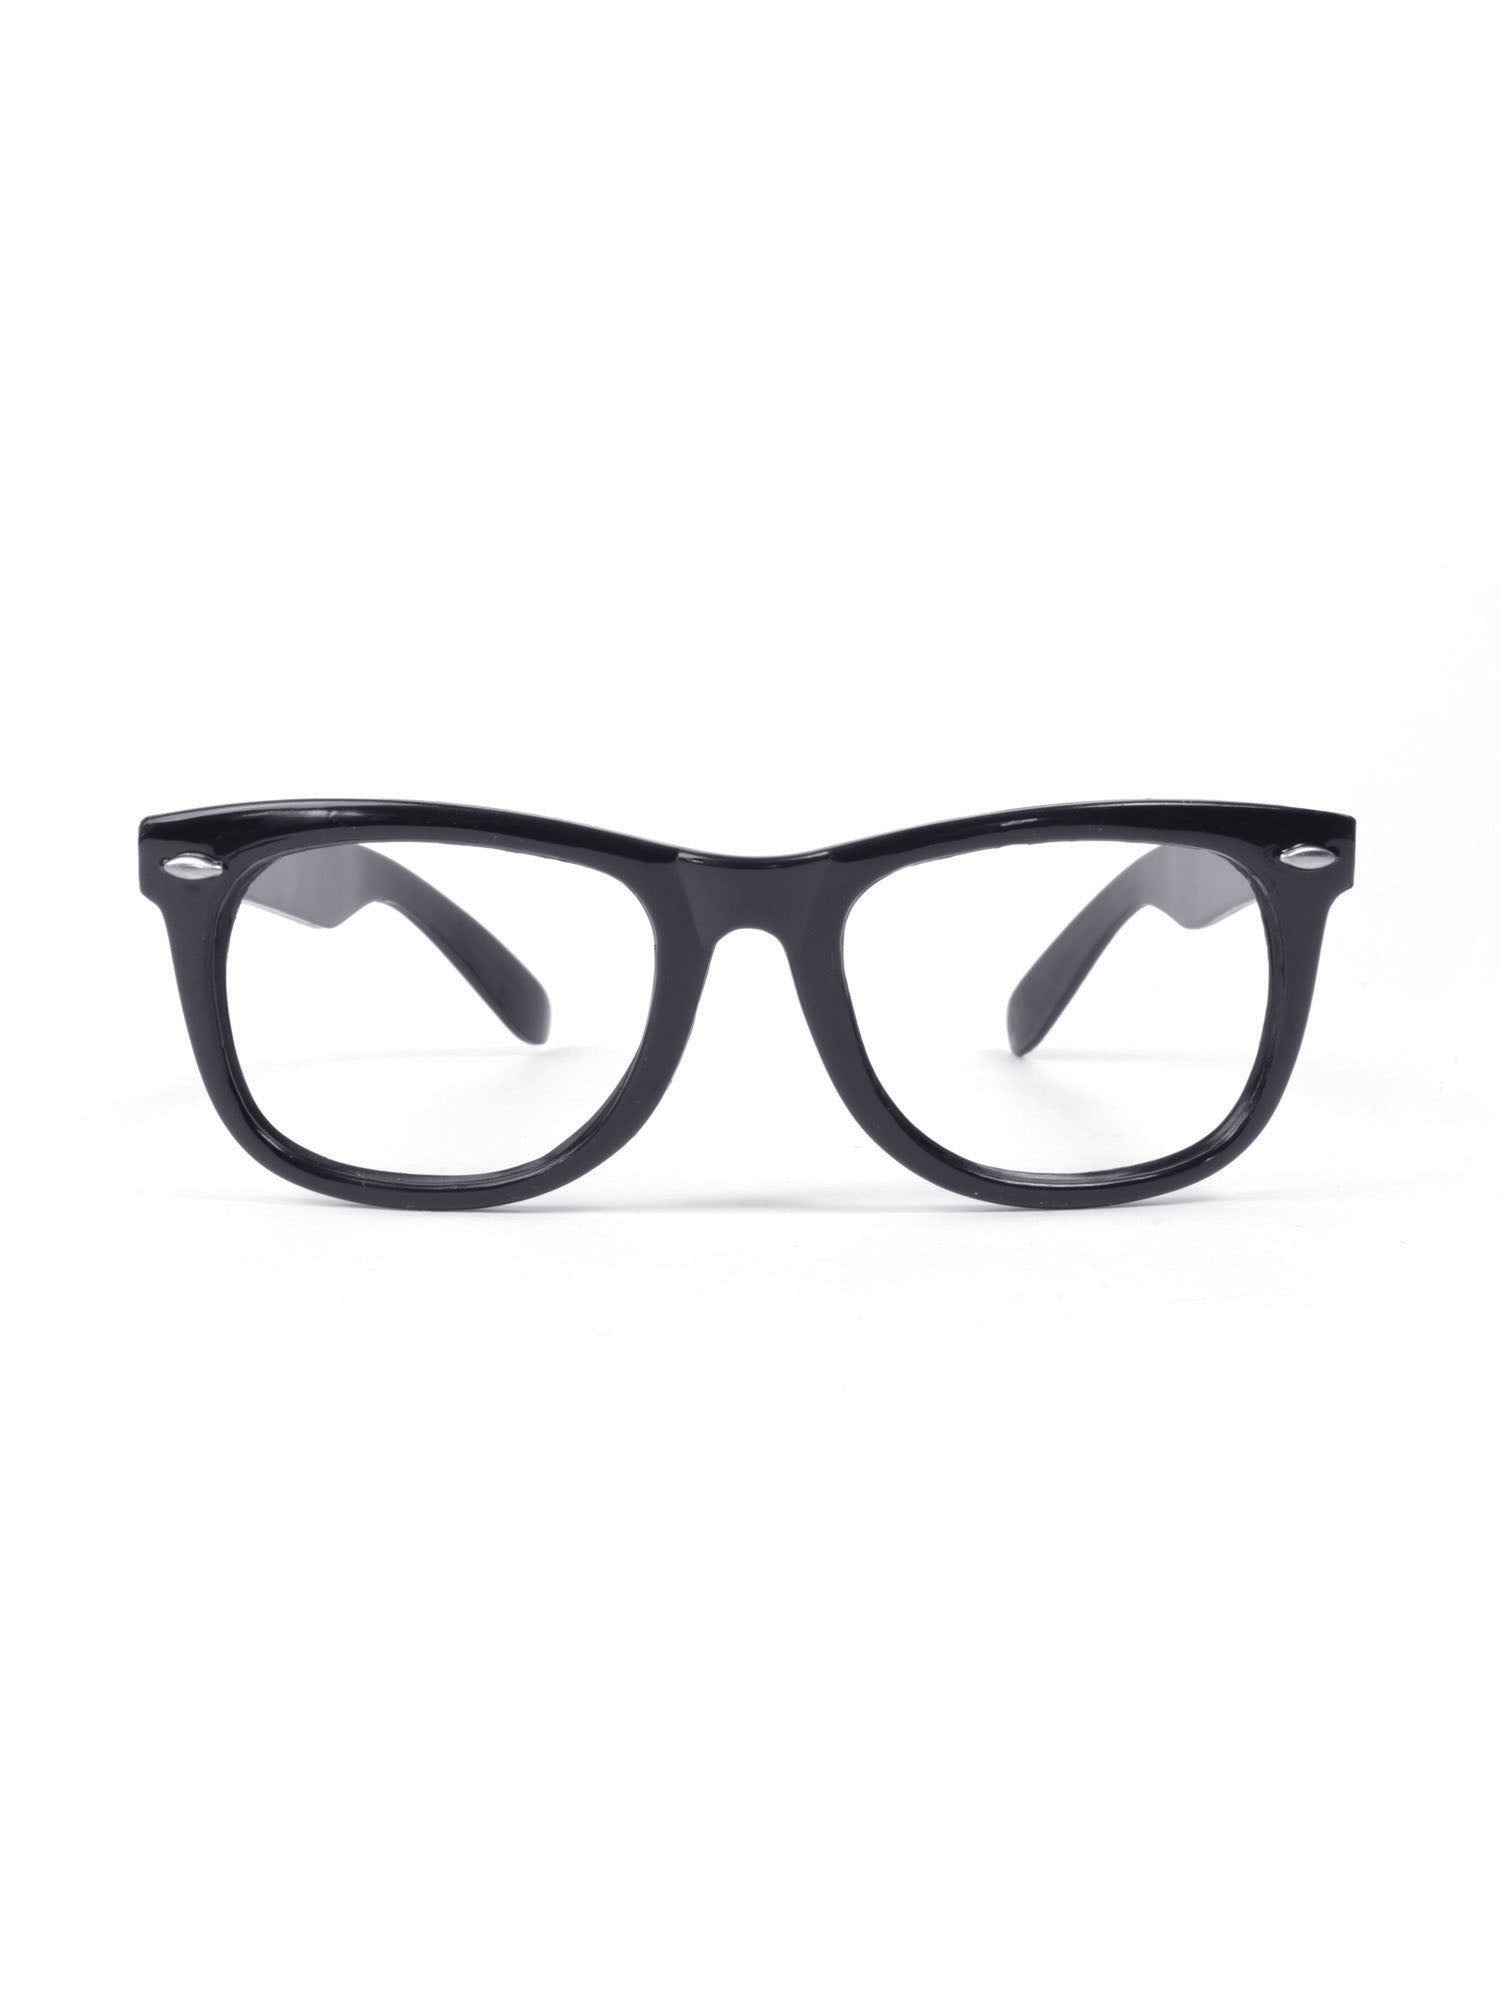 Glasses, Black, Generic, Accessories, One Size, Front